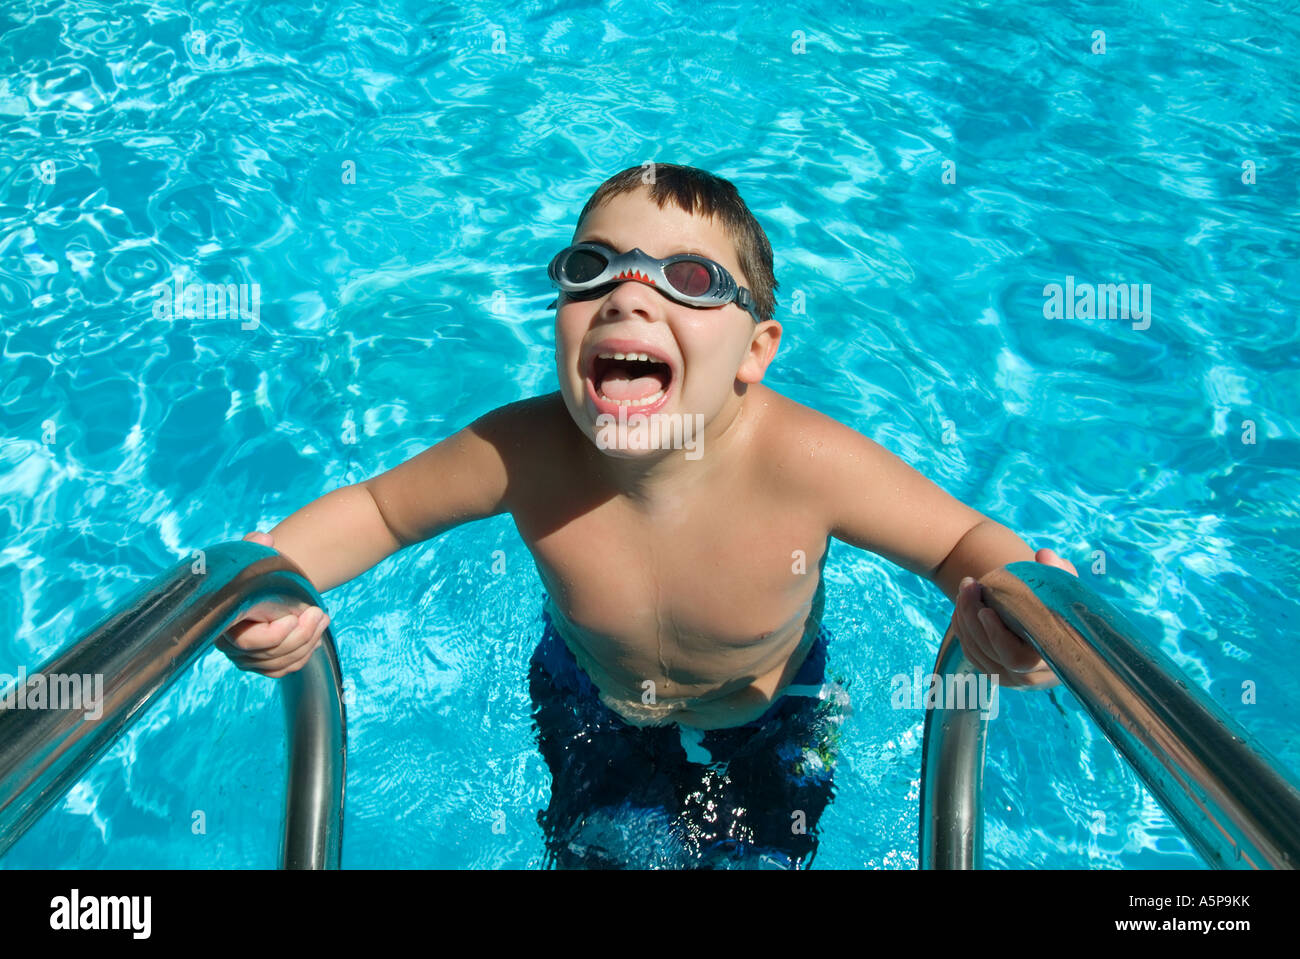 Boy with goggles laughing and playing in swimming pool. Stock Photo